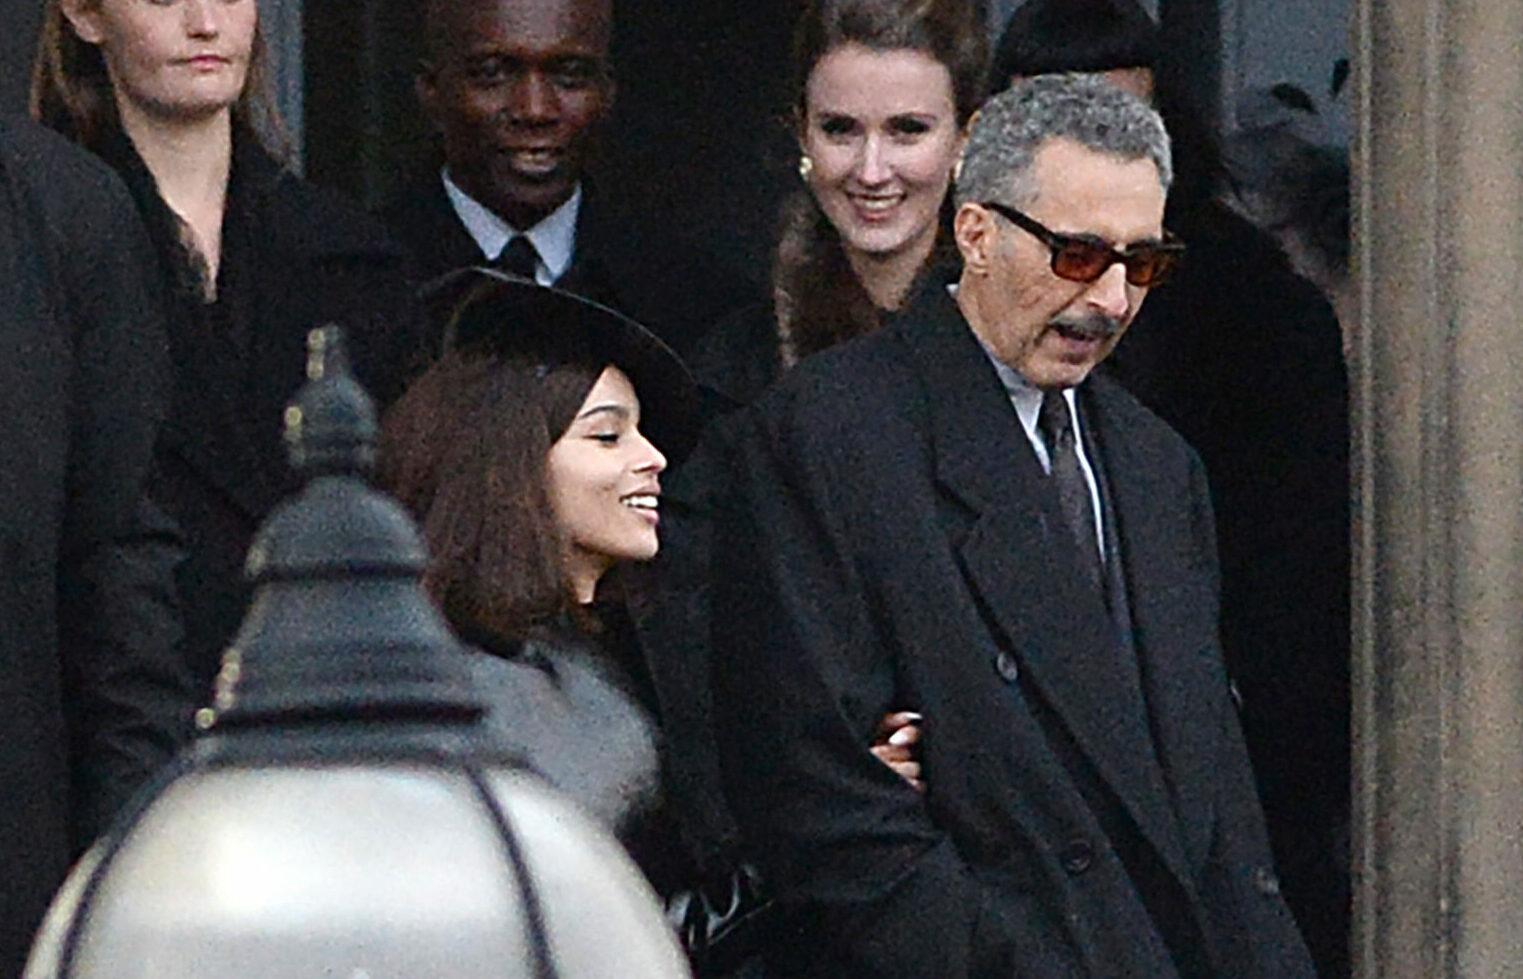 Zoe Kravitz (L), who plays Catwoman and John Turturro (R), who plays Carmine Falcone, filming 'The Batman' on St George's Hall in Liverpool city centre, after the cinema release date was delayed until 2022 due to fears over the coronavirus pandemic.